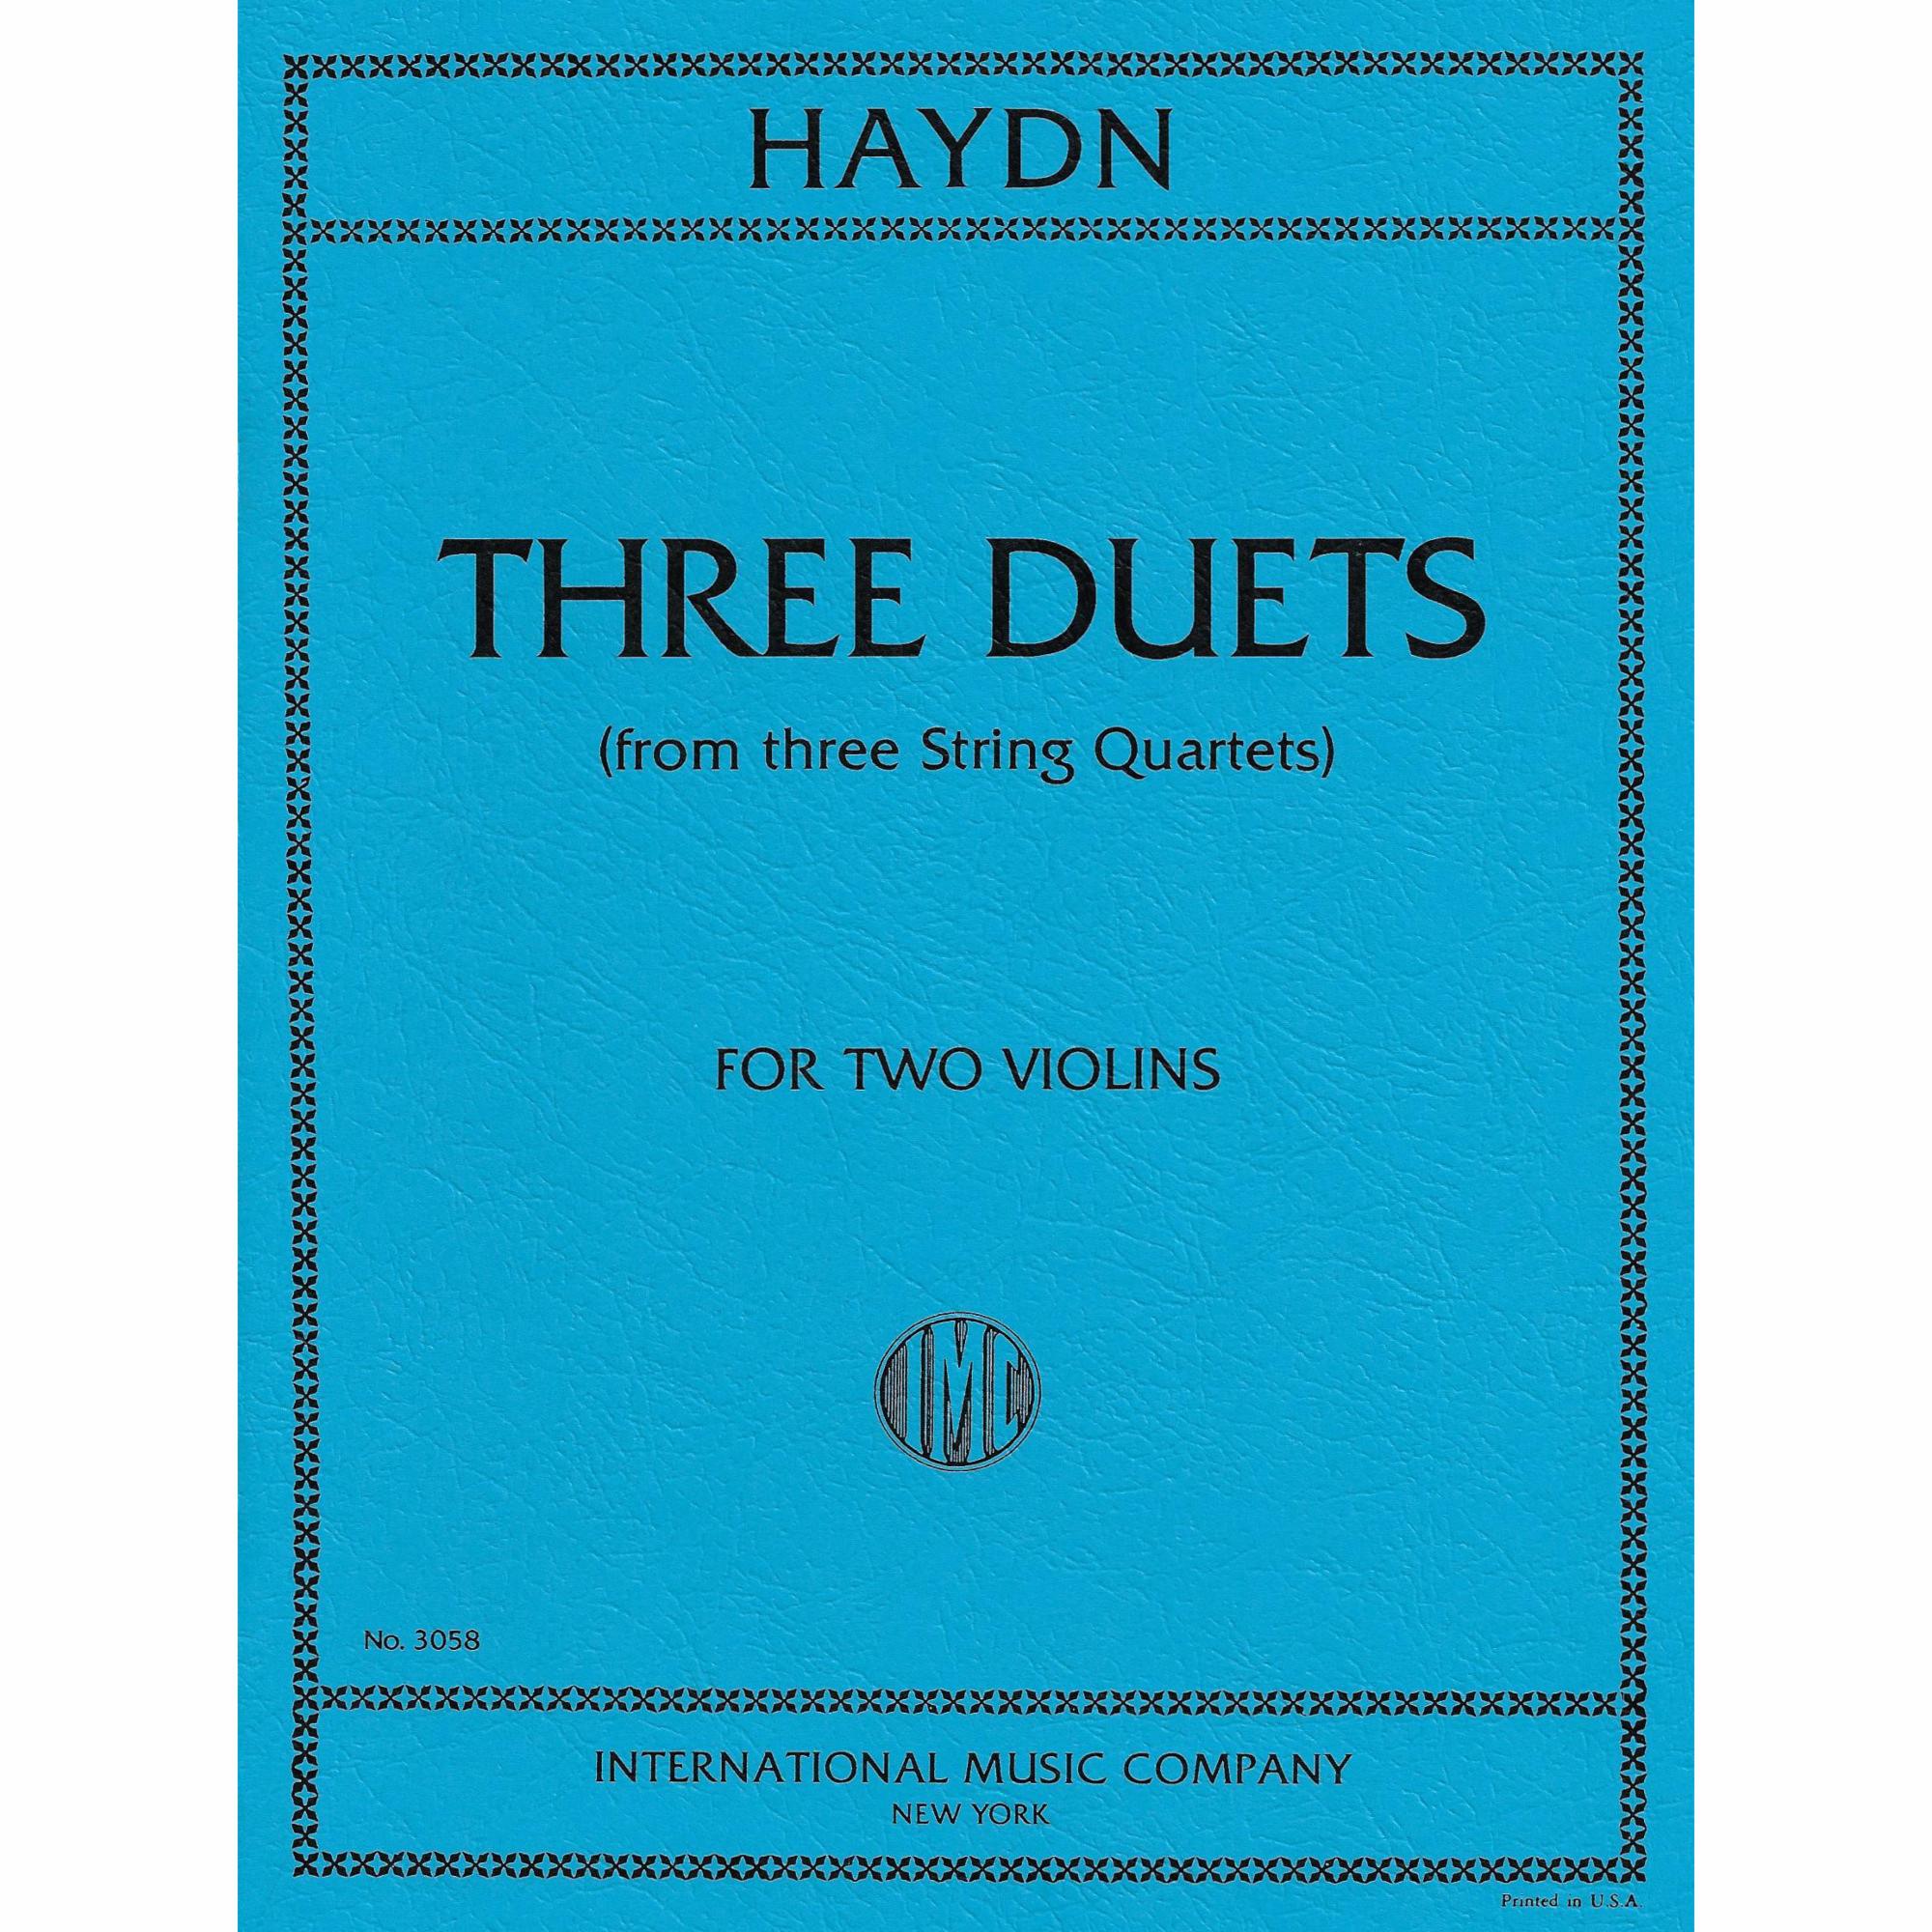 Haydn -- Three Duets, from Three String Quartets for Two Violins